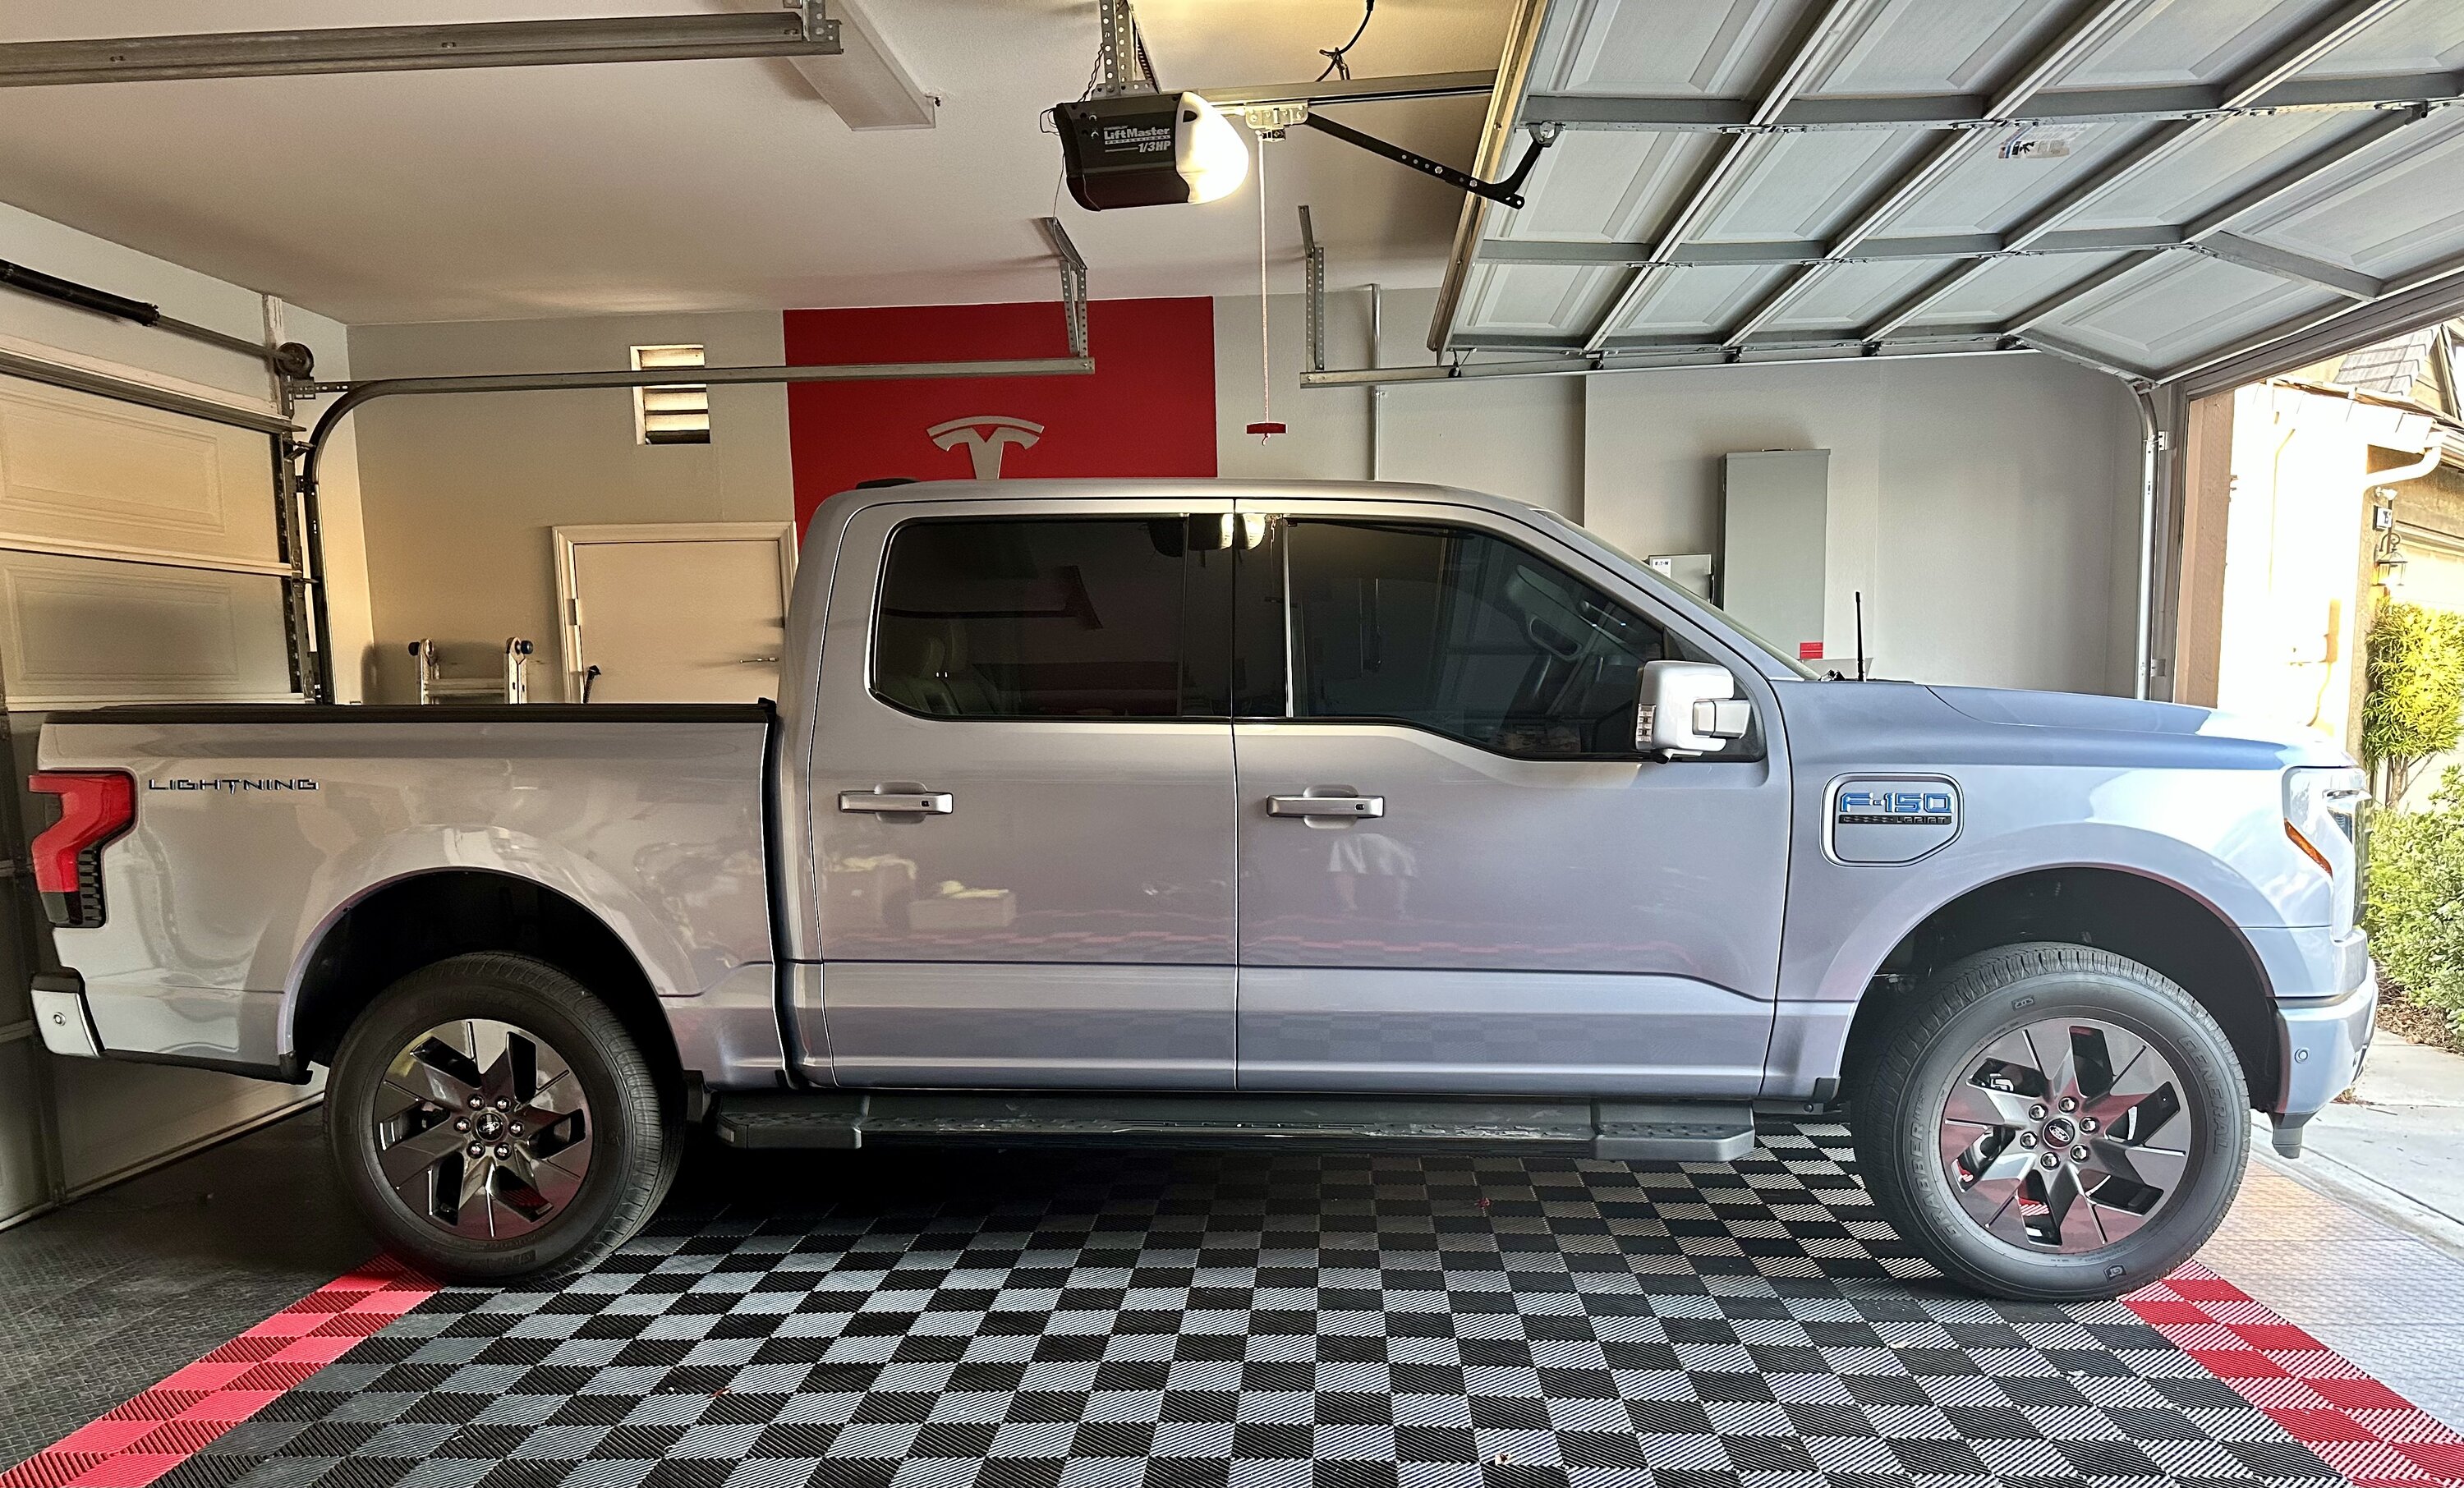 Ford F-150 Lightning Eibach R&D for Lightning lowering kit, leveling kit and lift kit -- submit your input 1F84A879-B83C-45A4-A51B-6AA0047BAE1B